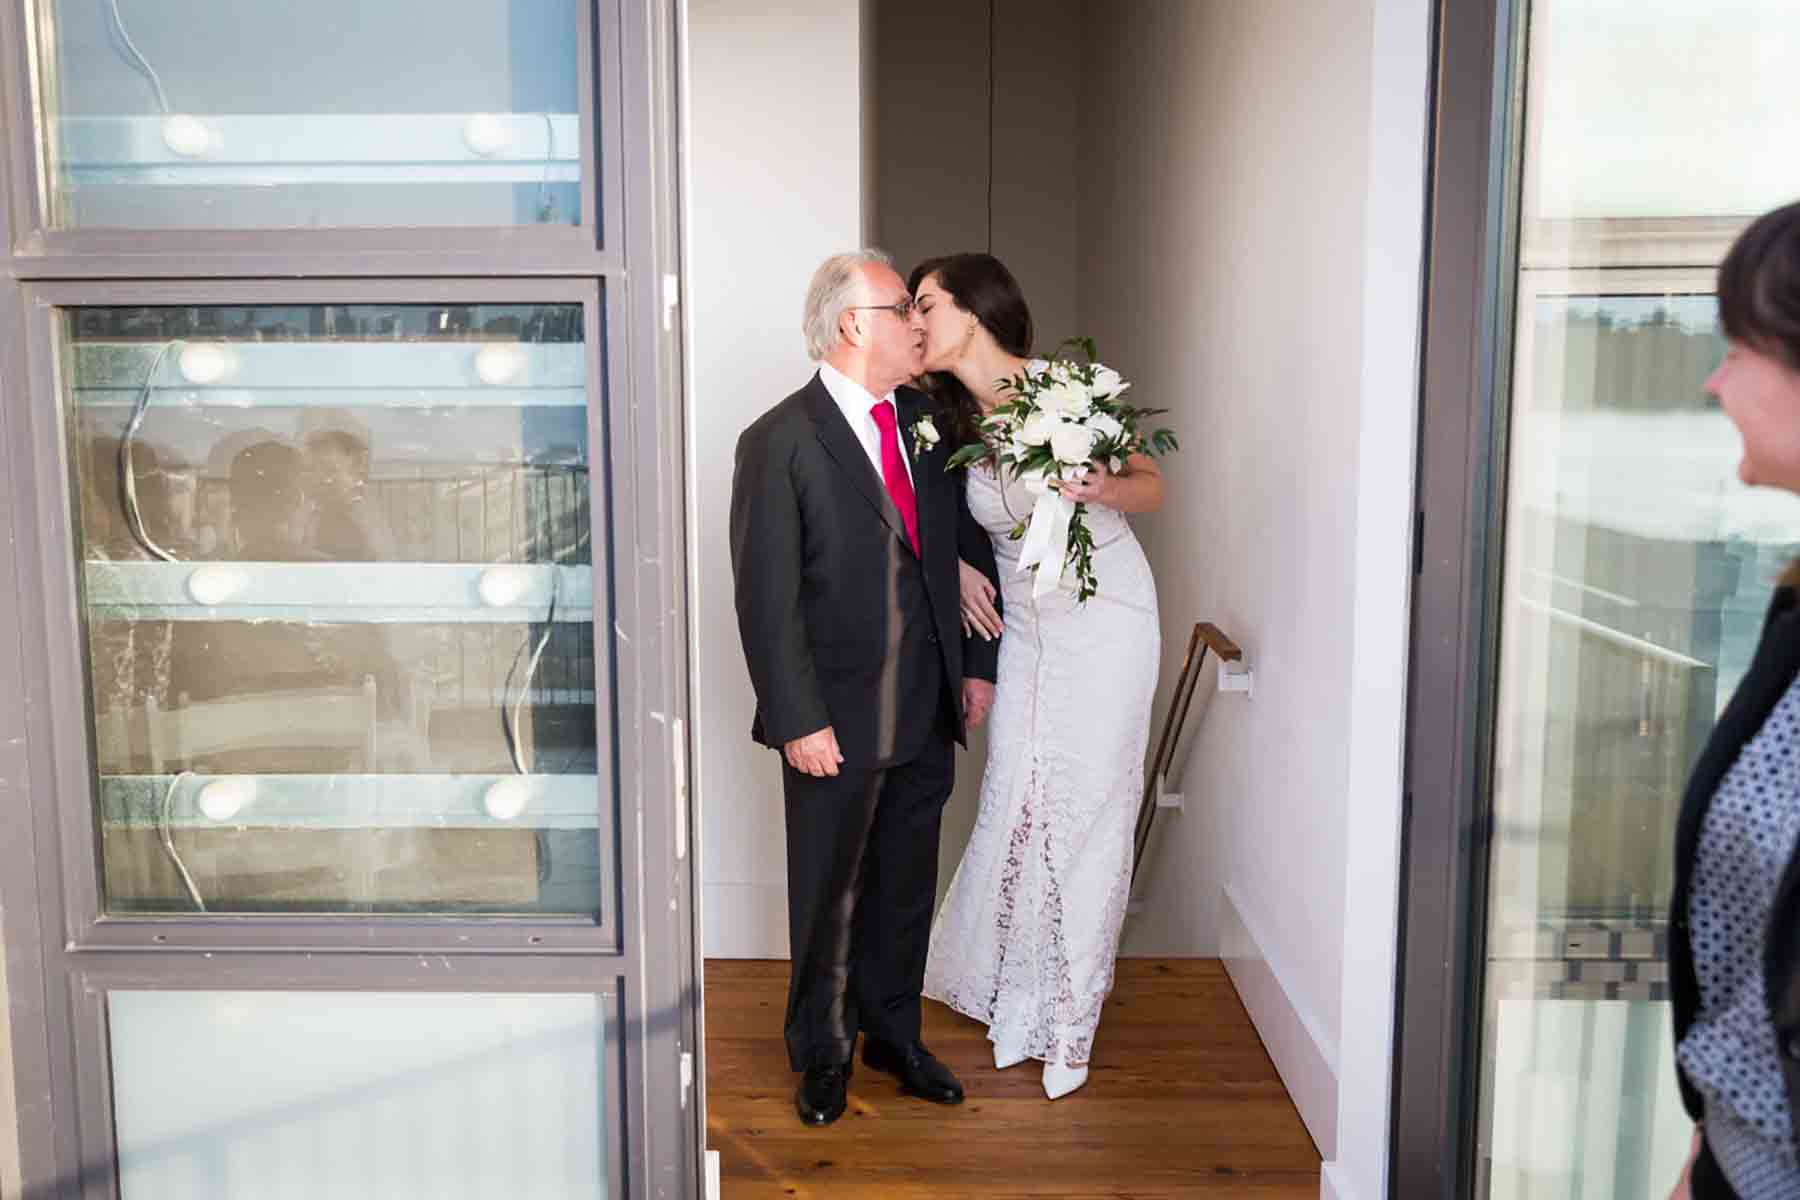 Bride kissing father on the cheek in hallway for an article on how to save money on wedding photography